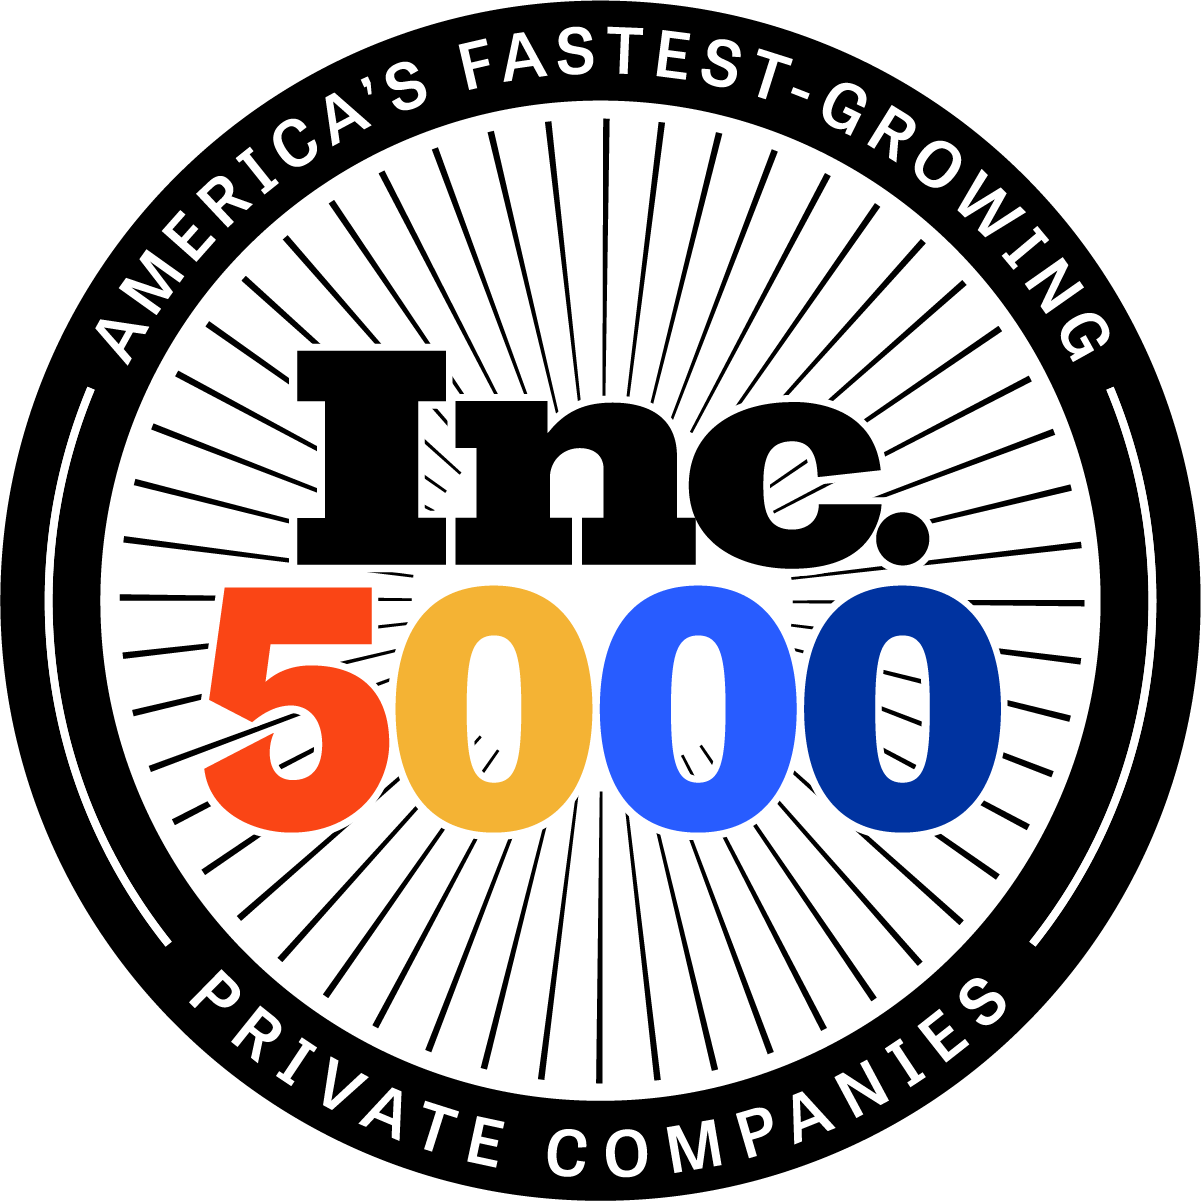 Contrast Security Makes Its Debut on the Inc. 5000 List of America’s Fastest Growing Companies